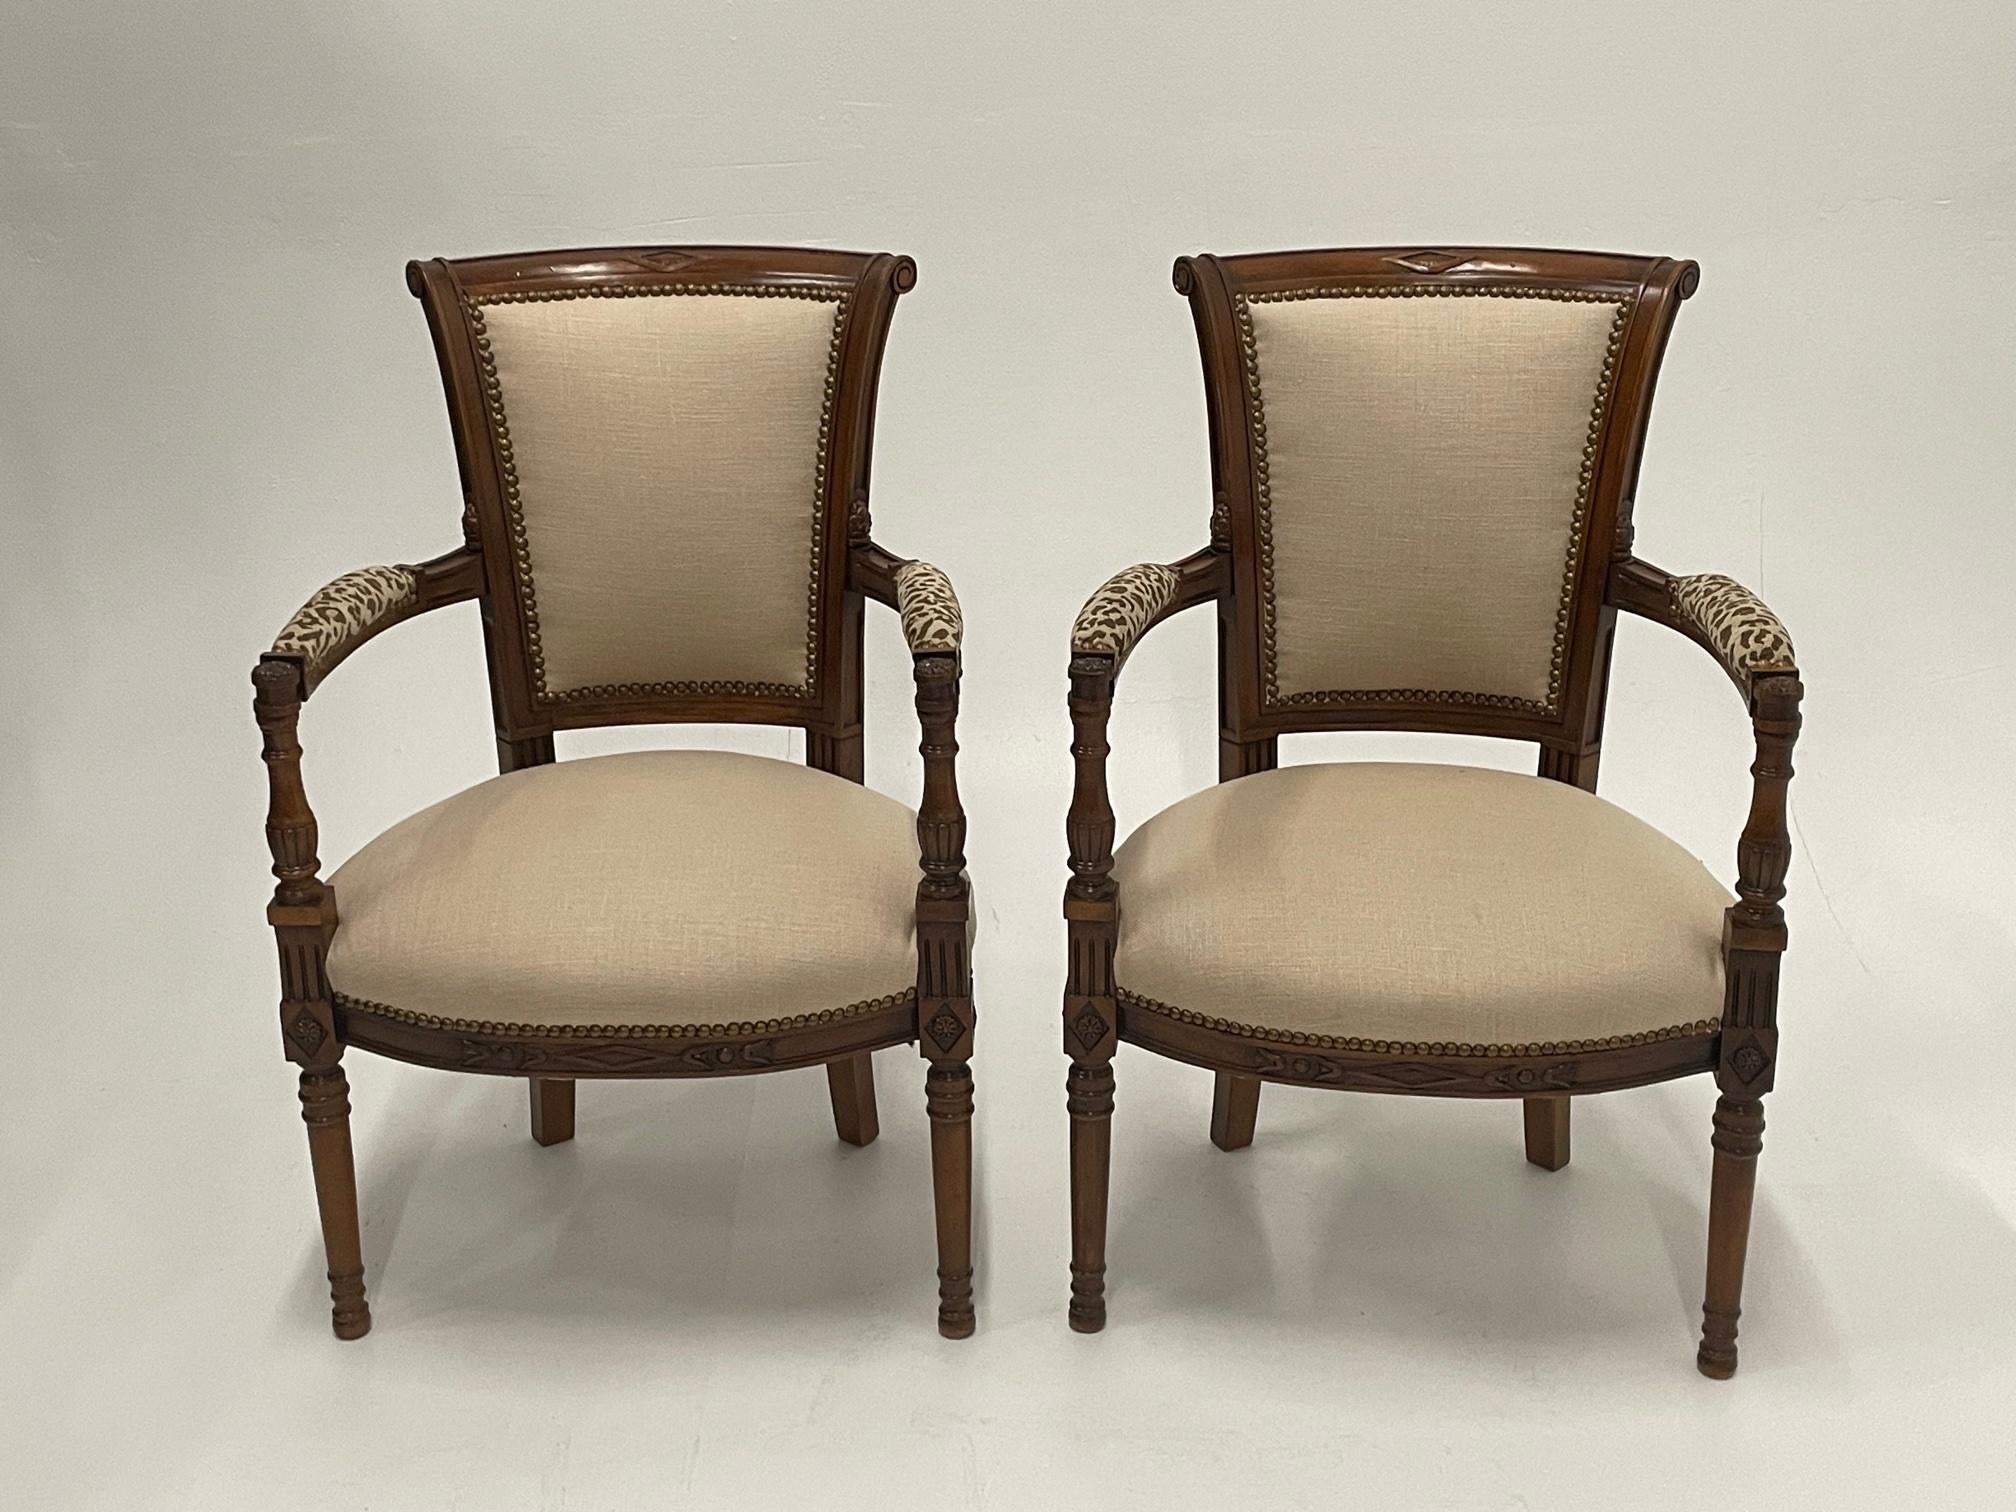 Elegant updated pair of French carved walnut armchairs tastefully and stylishly upholstered in oatmeal linen and coordinating cotton leopard fabric, masterfully finished with brass nailheads in all the right places.
Arm height 25.